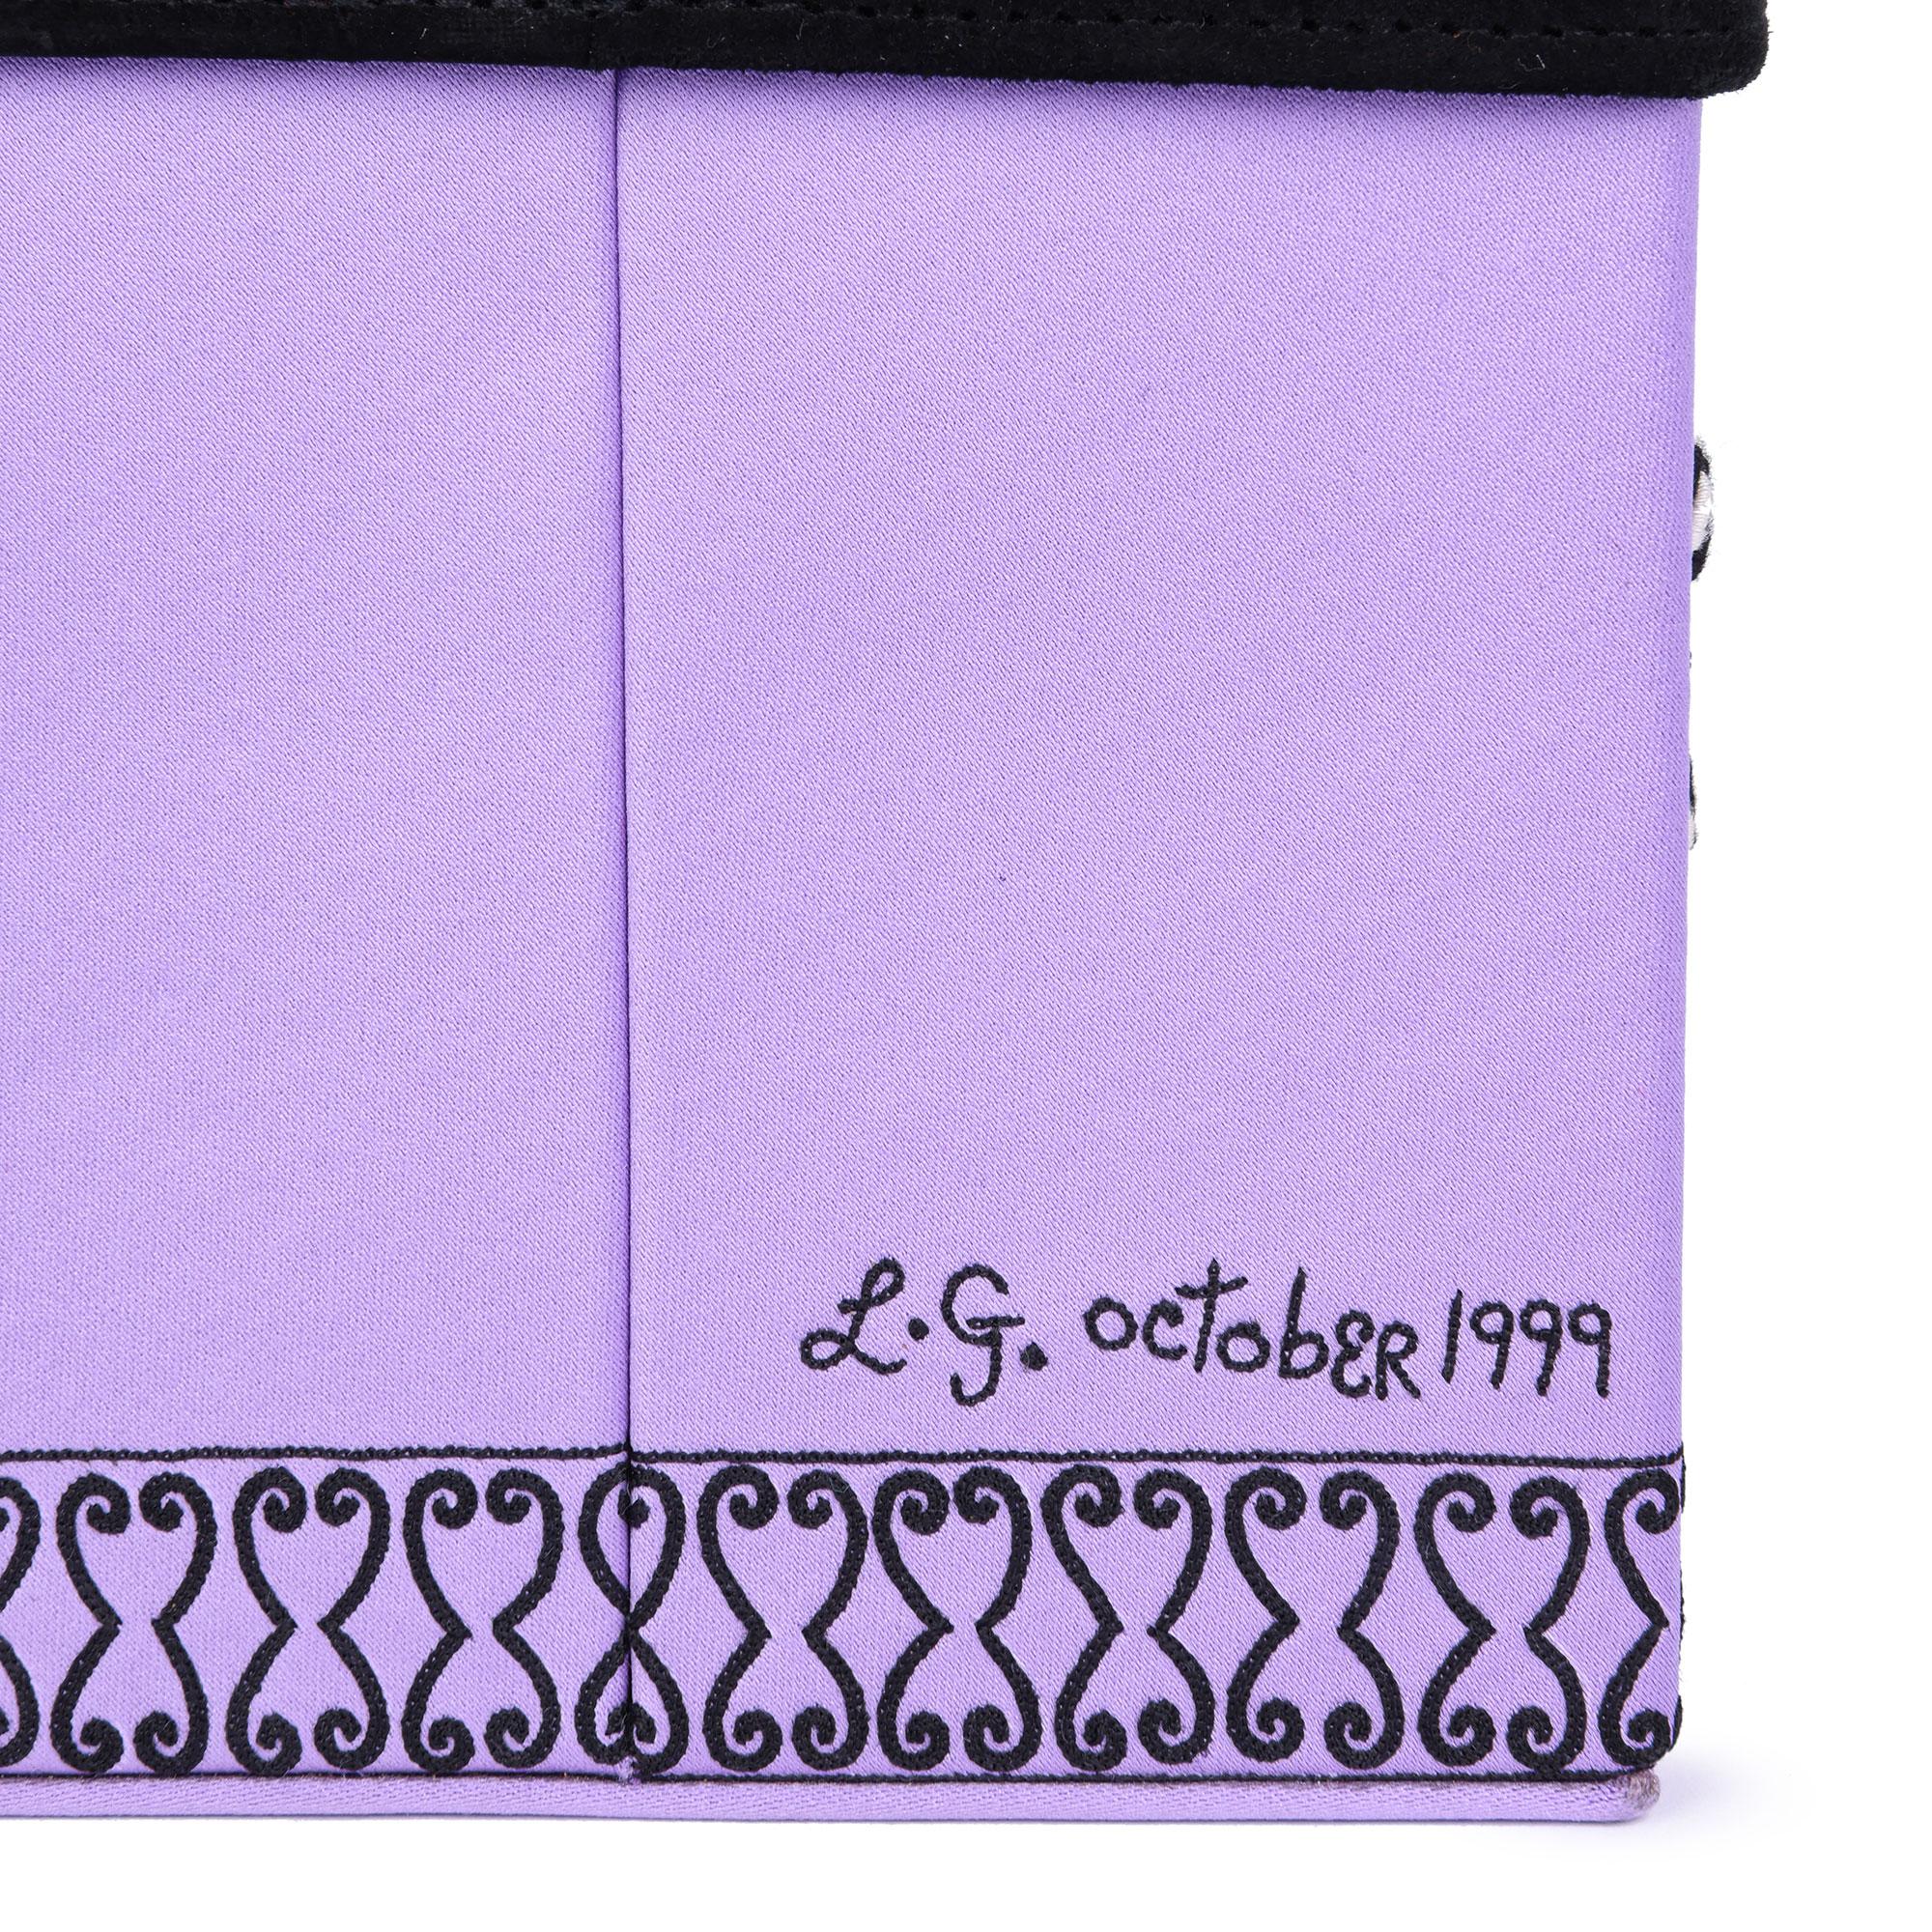 LULU GUINNESS
Lilac Satin & Black Suede Vintage House Box Bag

Age (Circa): 1999
Accompanied By: Lulu Guinness Dust Bag
Authenticity Details: (Made in England)
Gender: Ladies
Type: Top Handle

Colour: Black, Lilac
Material(s): Velvet,